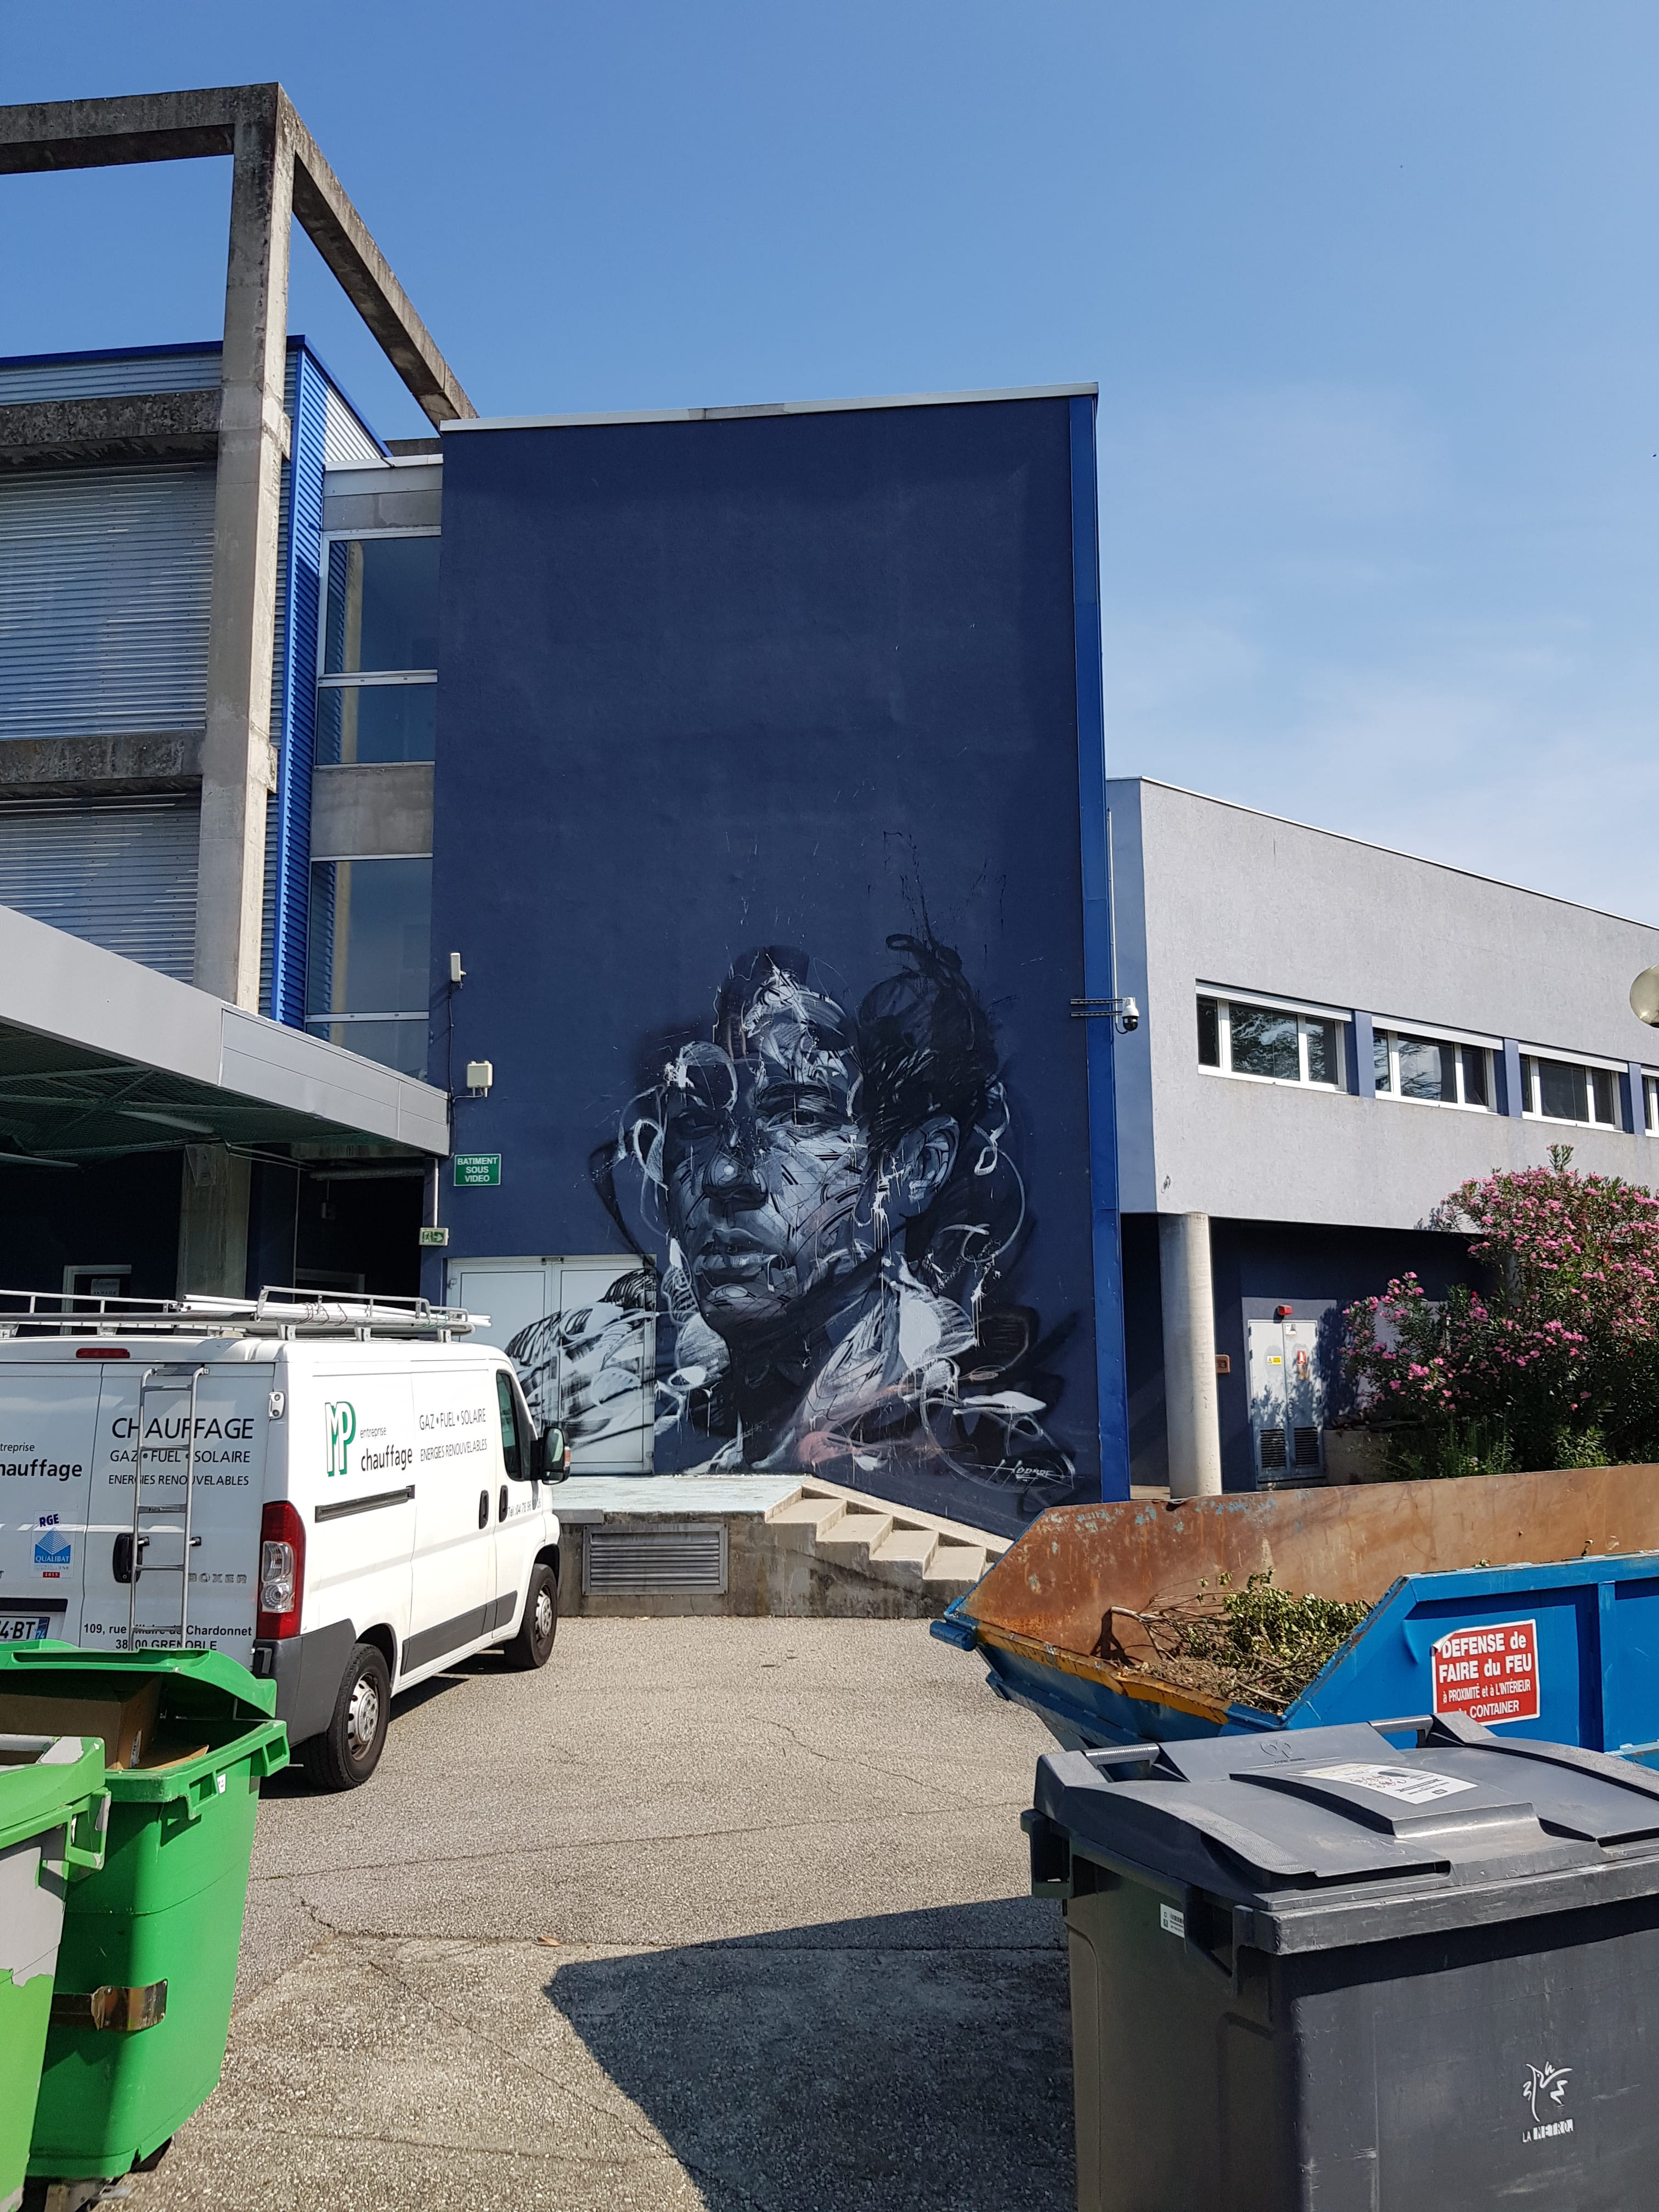 Graffiti 6472  by the artist Hopare captured by Mephisroth in Échirolles France